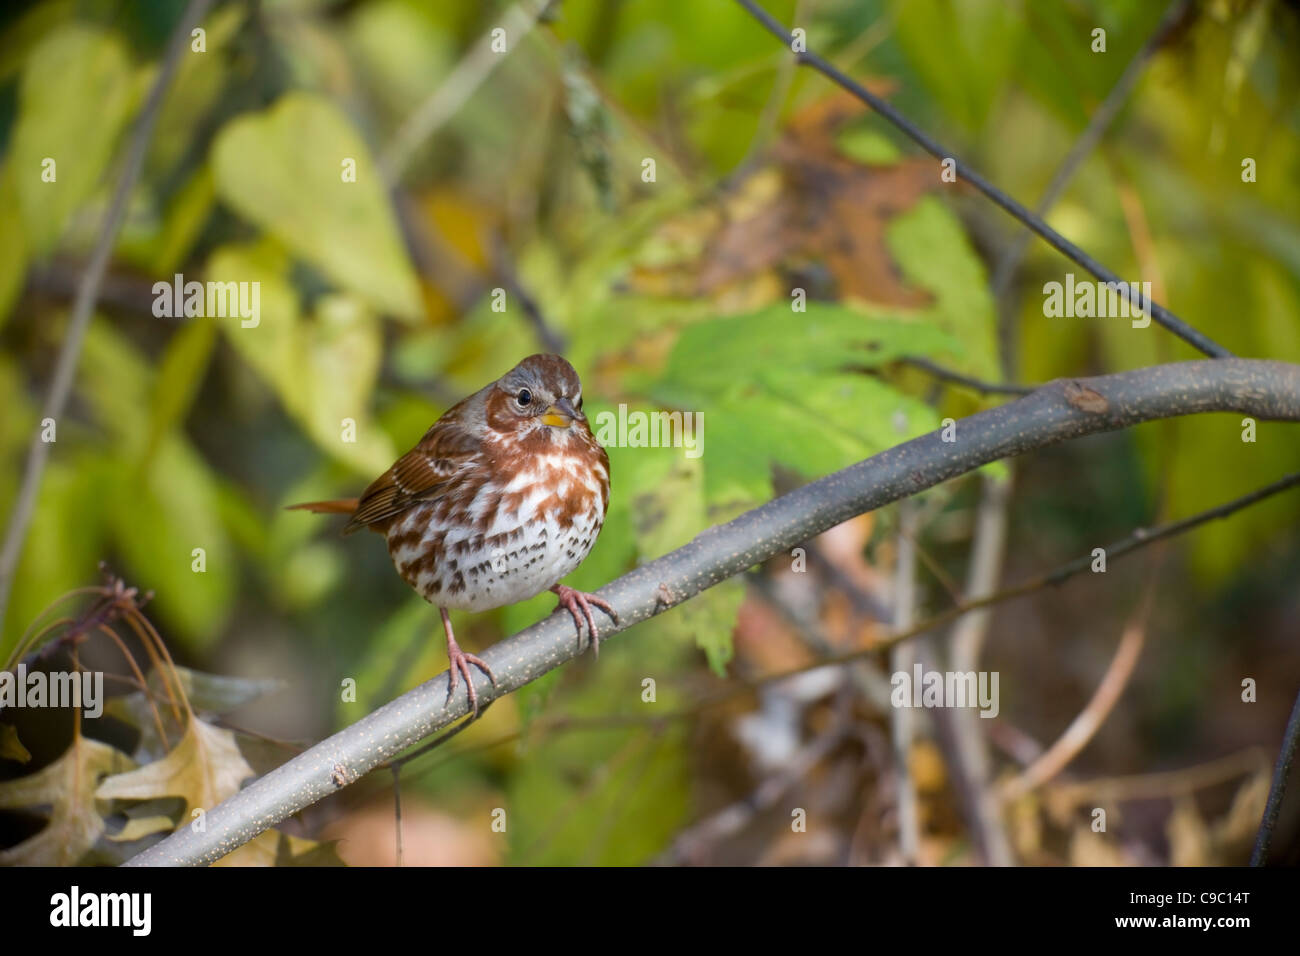 Fox Sparrow (Passerella iliaca iliaca), Red subspecies, perched on a branch in New York City's Central Park. Stock Photo